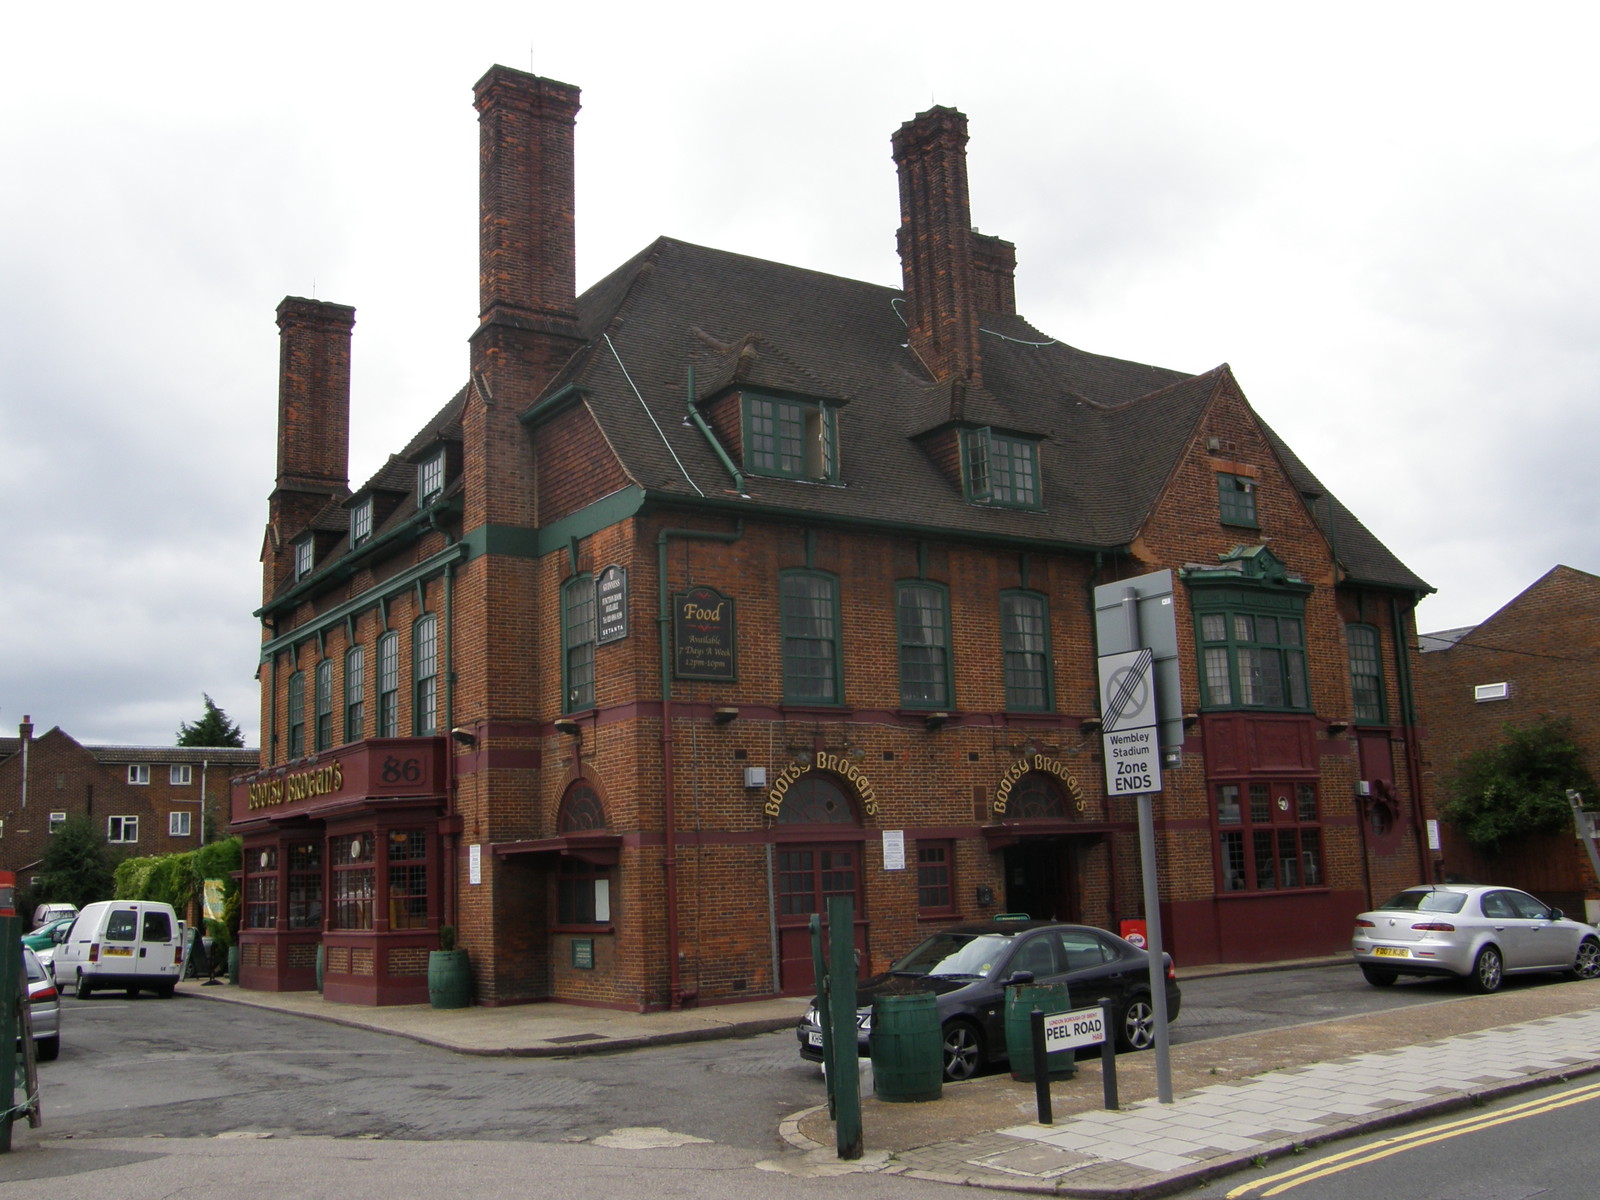 The Bootsy Brogans  pub on the corner of Peel Road and East Lane